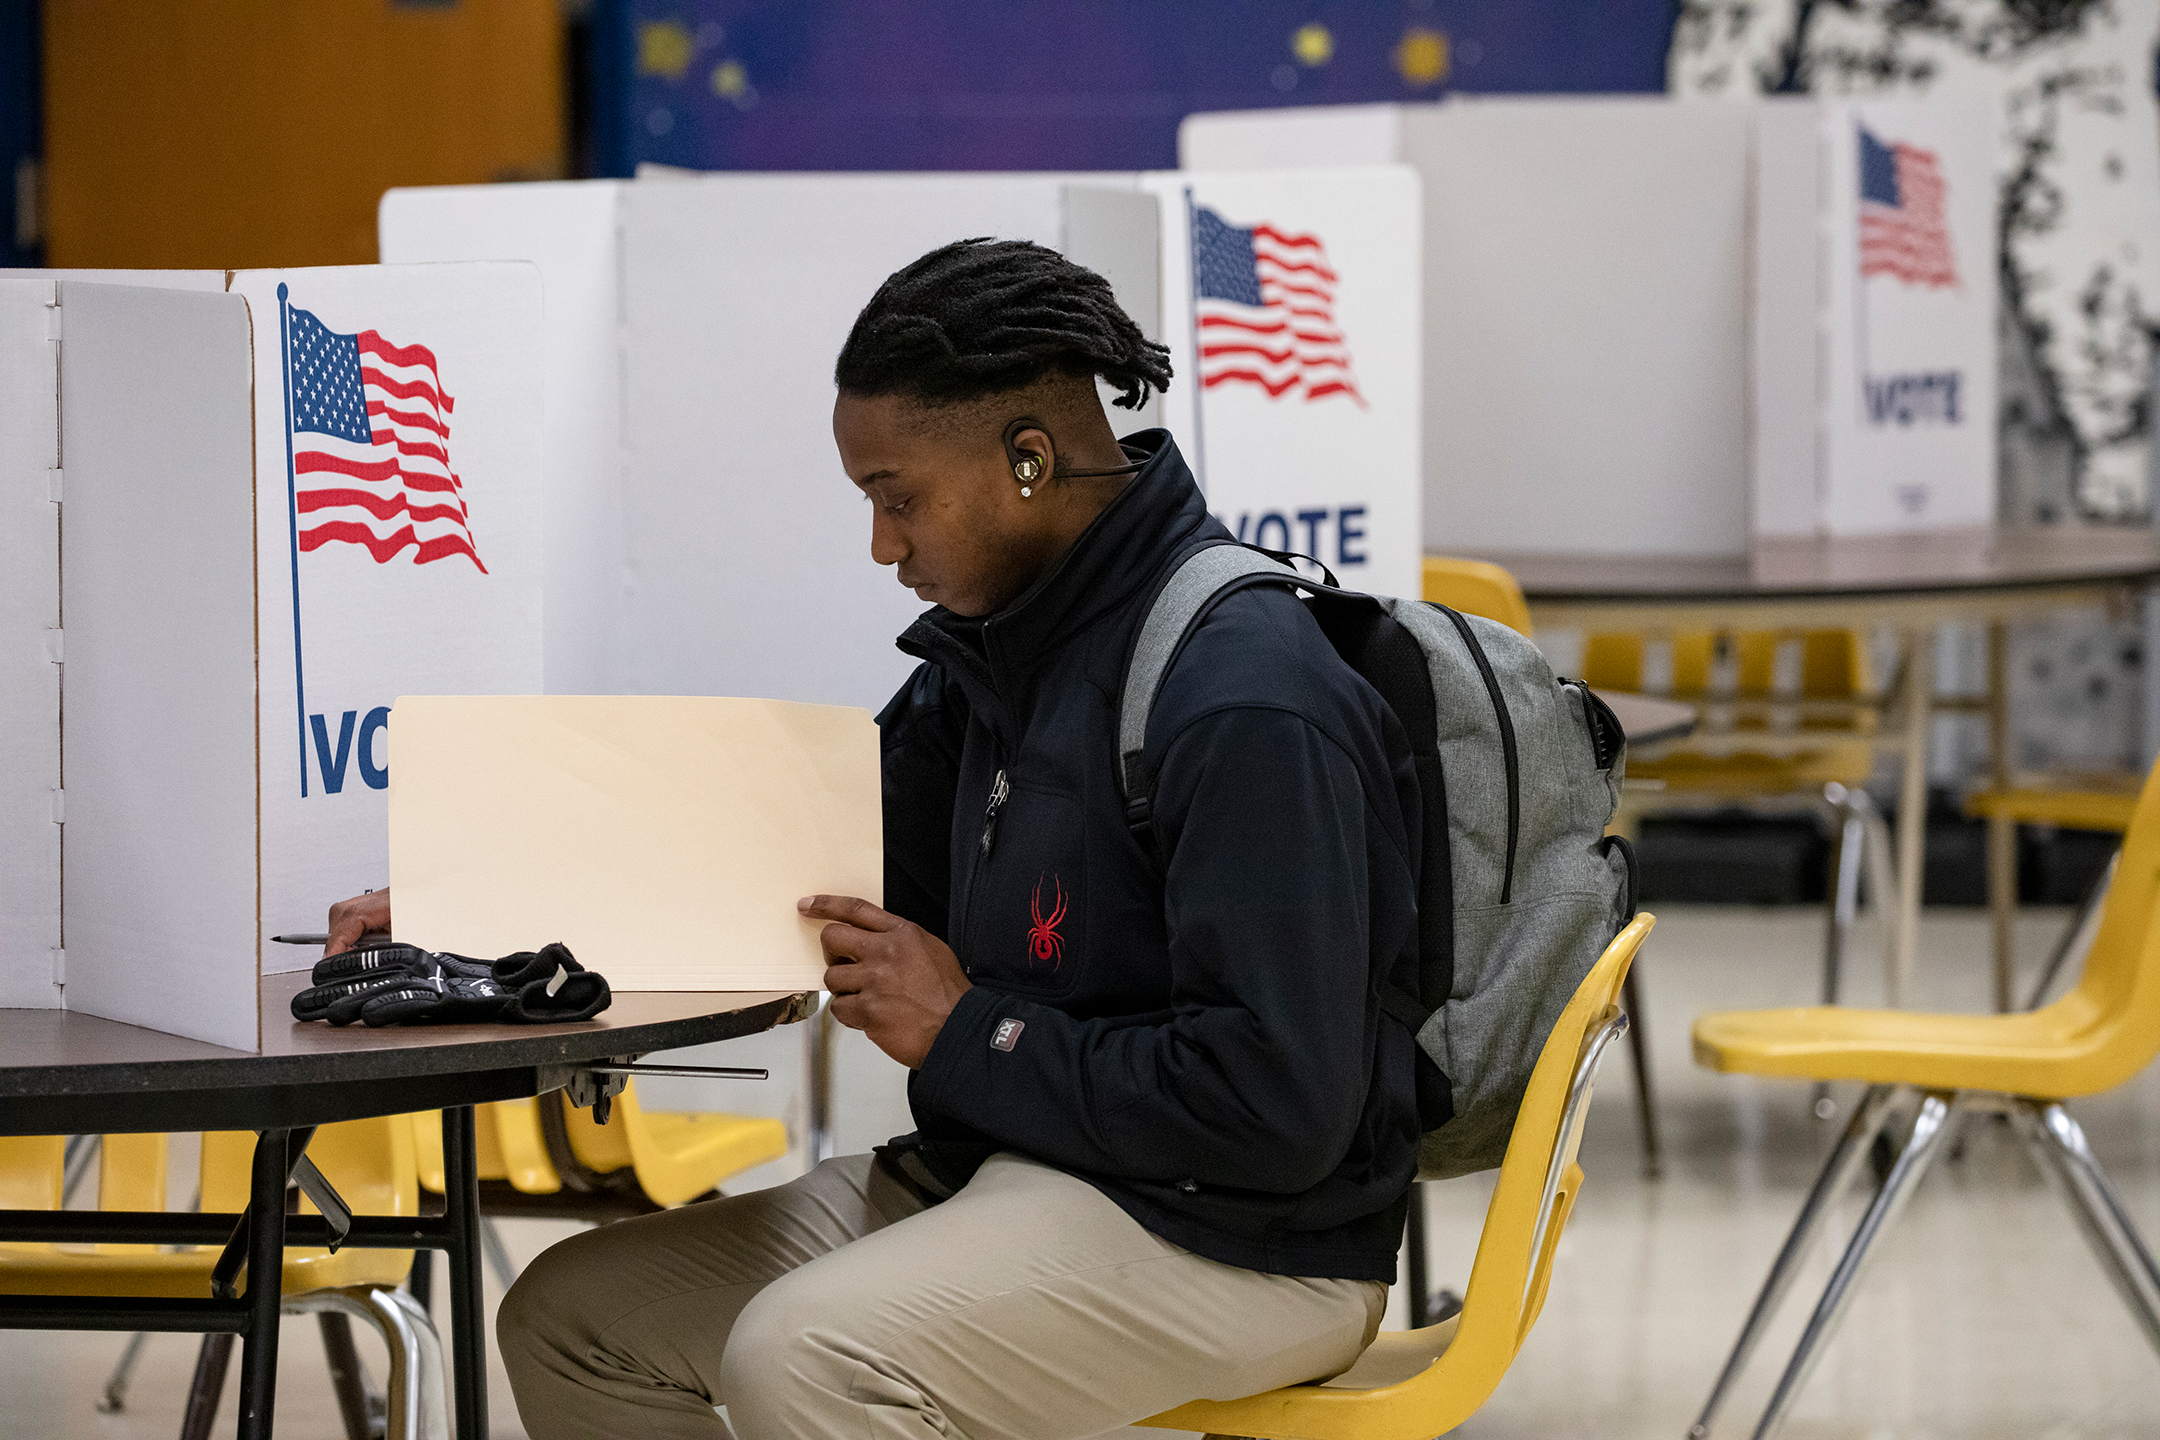 A young man sits at a voting booth during the 2020 presidential primary election